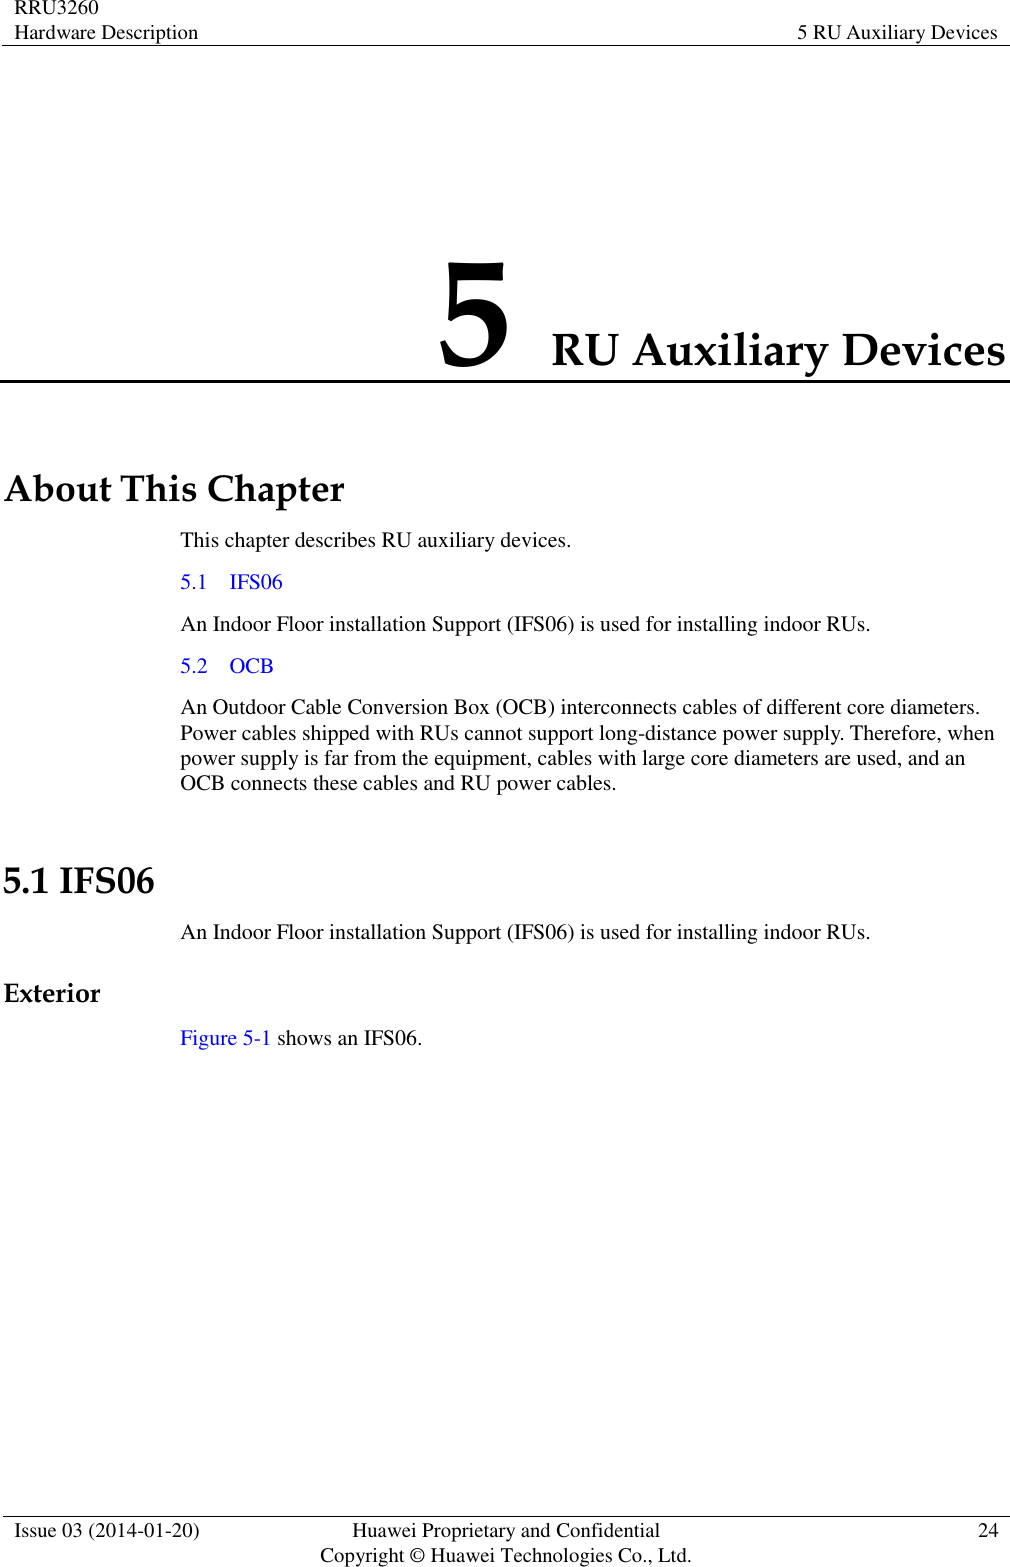 RRU3260 Hardware Description 5 RU Auxiliary Devices  Issue 03 (2014-01-20) Huawei Proprietary and Confidential                                     Copyright © Huawei Technologies Co., Ltd. 24  5 RU Auxiliary Devices About This Chapter This chapter describes RU auxiliary devices. 5.1    IFS06 An Indoor Floor installation Support (IFS06) is used for installing indoor RUs. 5.2    OCB An Outdoor Cable Conversion Box (OCB) interconnects cables of different core diameters. Power cables shipped with RUs cannot support long-distance power supply. Therefore, when power supply is far from the equipment, cables with large core diameters are used, and an OCB connects these cables and RU power cables. 5.1 IFS06 An Indoor Floor installation Support (IFS06) is used for installing indoor RUs. Exterior Figure 5-1 shows an IFS06. 